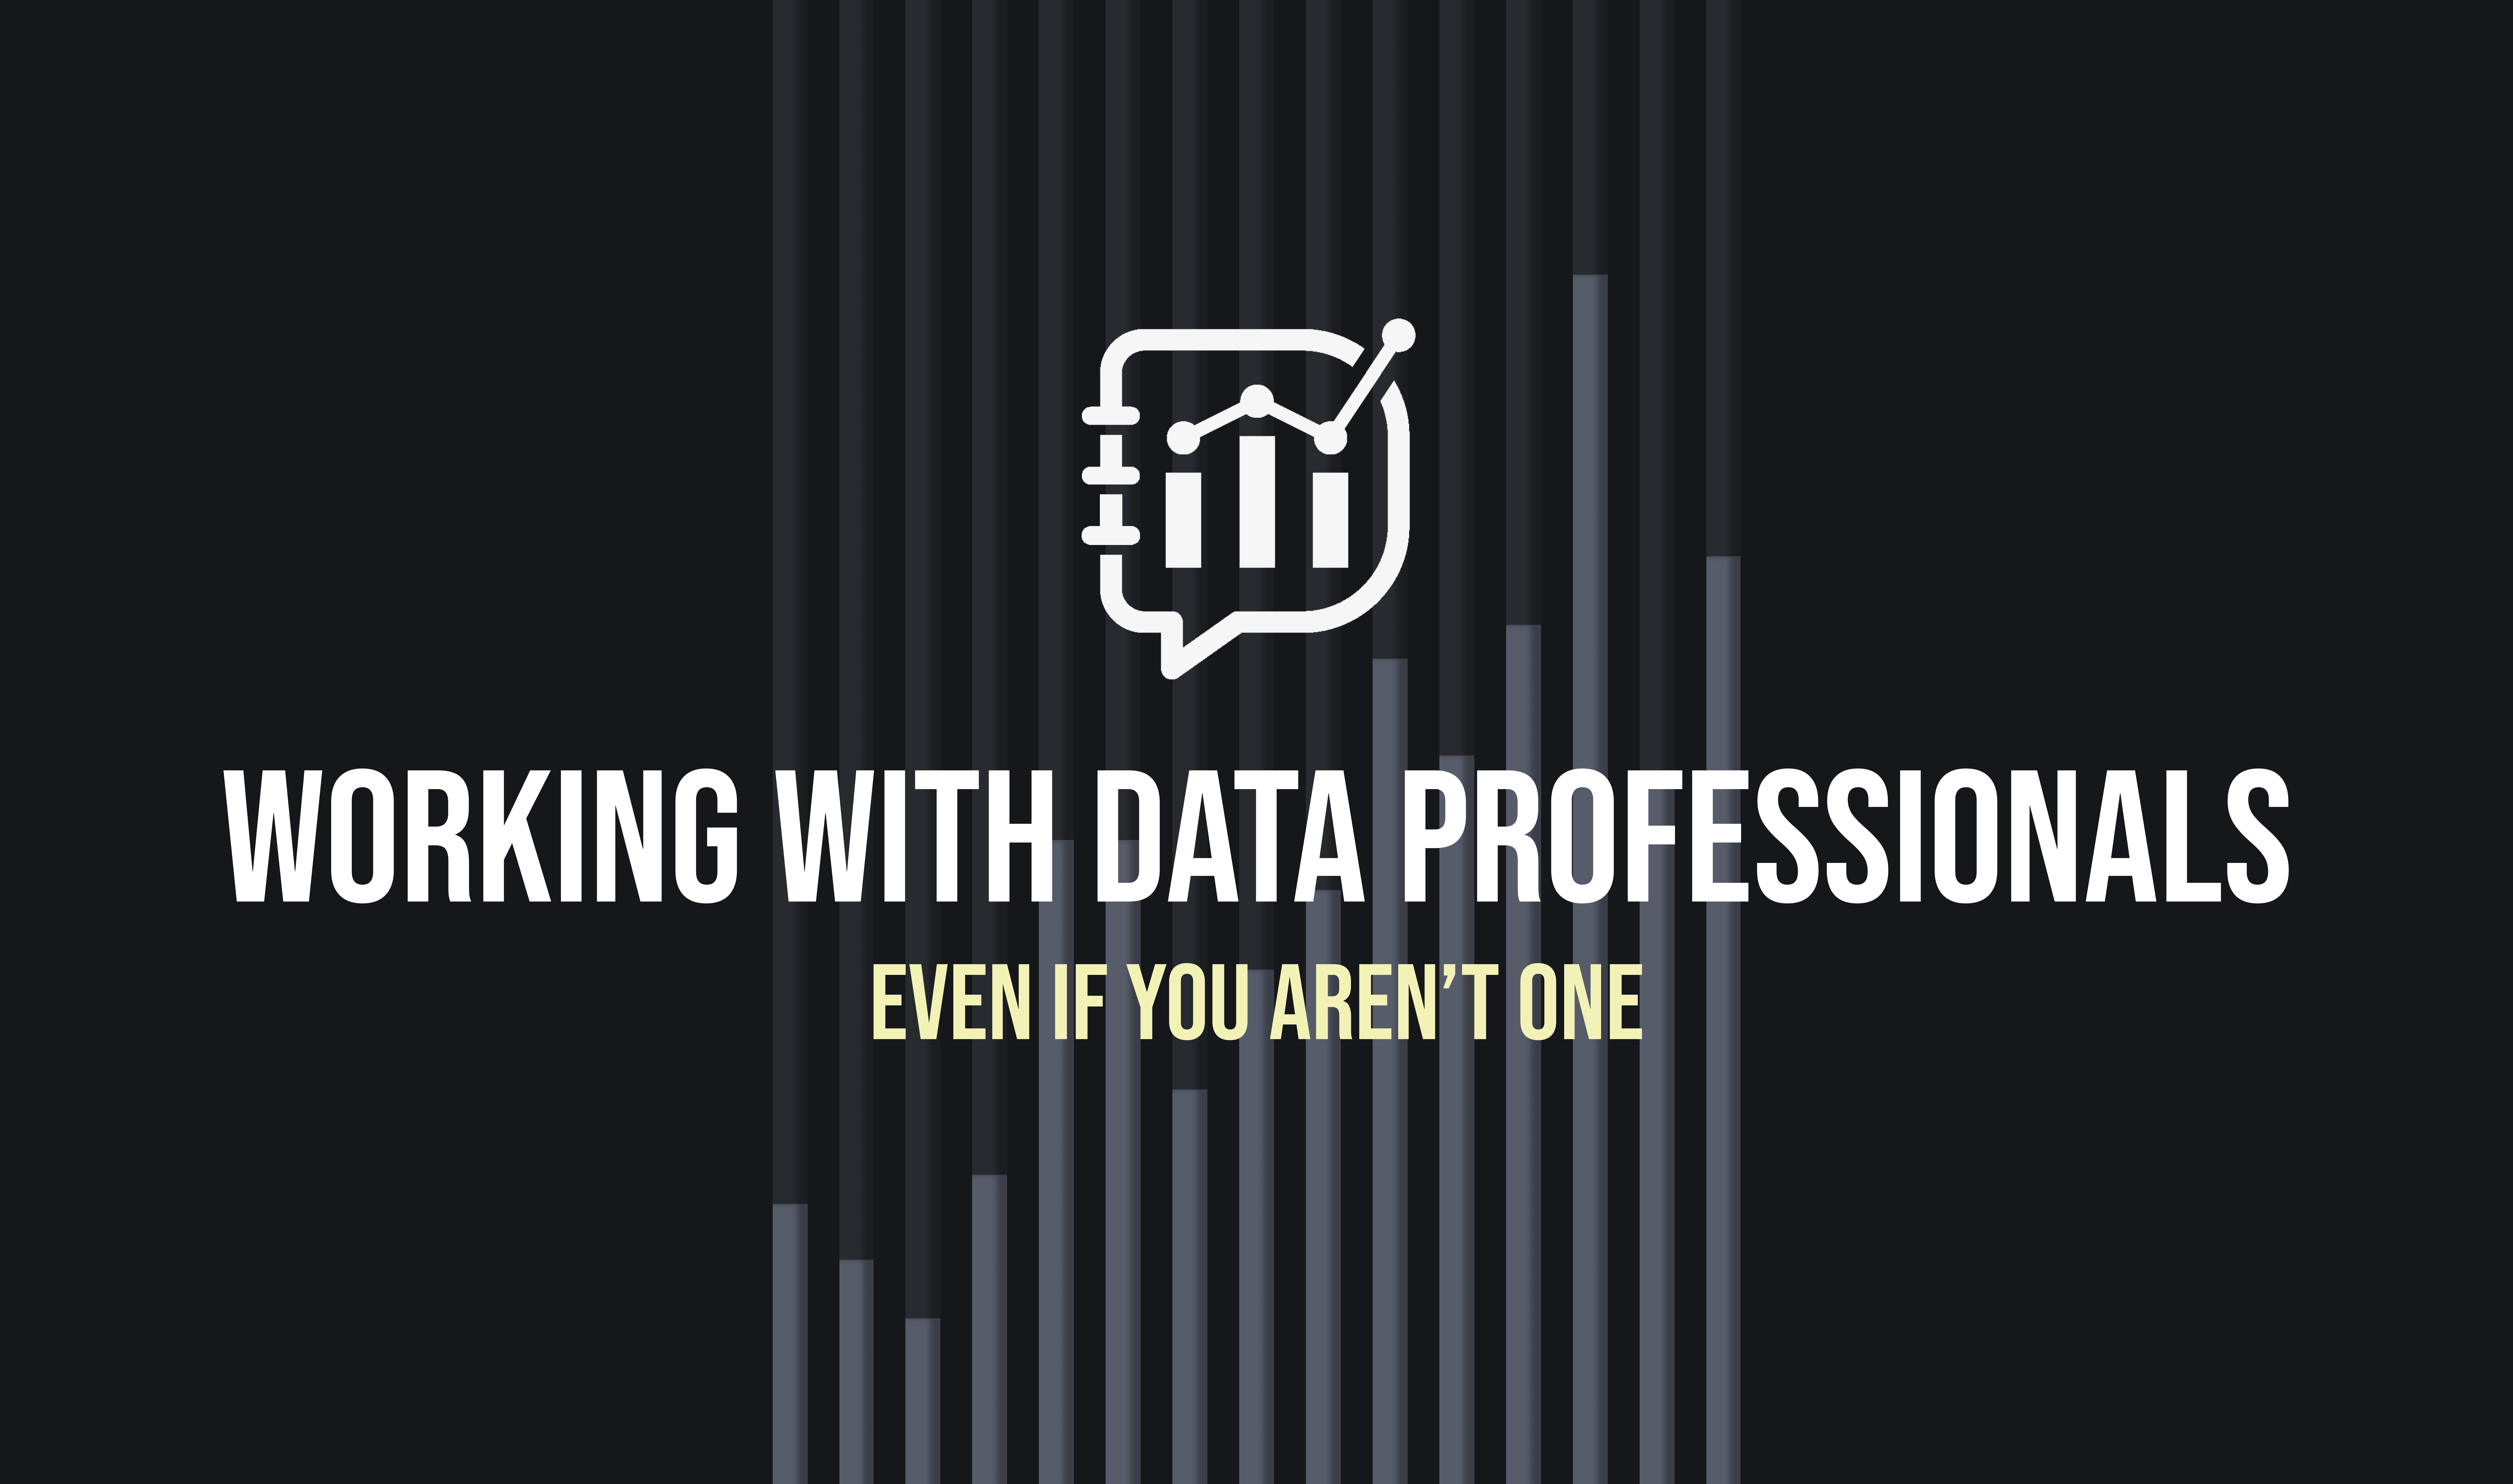 Image that reads working with data professionals even if you aren't one. Dark black background. Data literacy white logo in white centered above lettering in middle. Vertical stacked bar chart with grey and light black vertical lines in the middle third of the image.